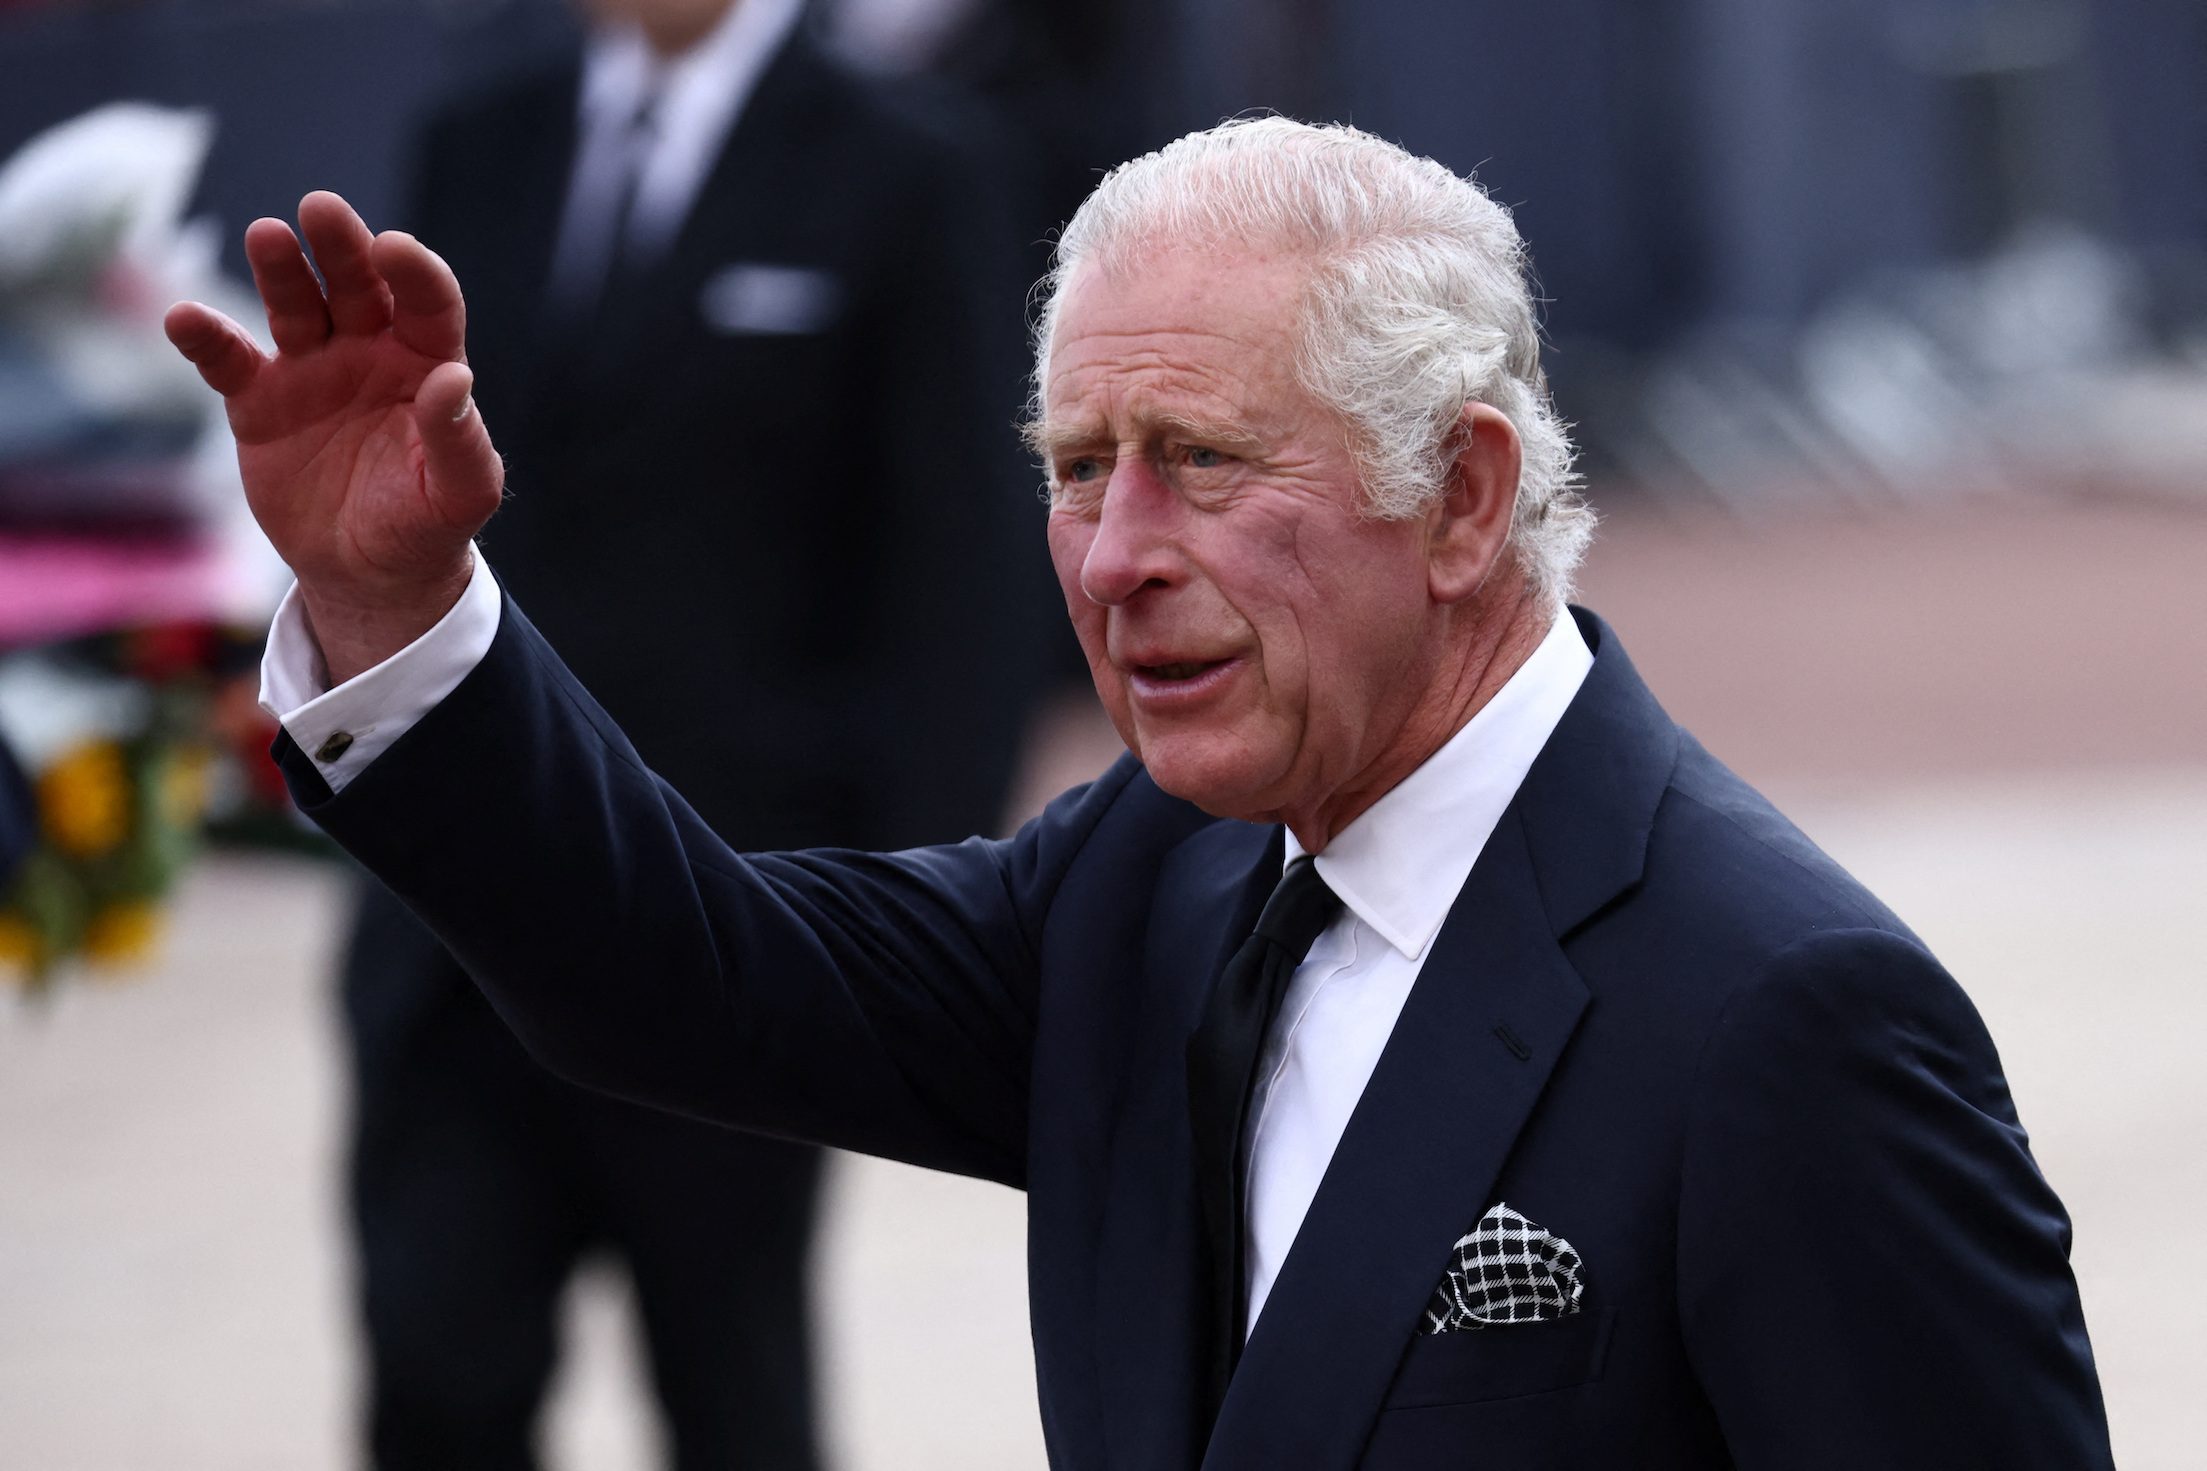 King Charles greets well-wishers outside Buckingham Palace